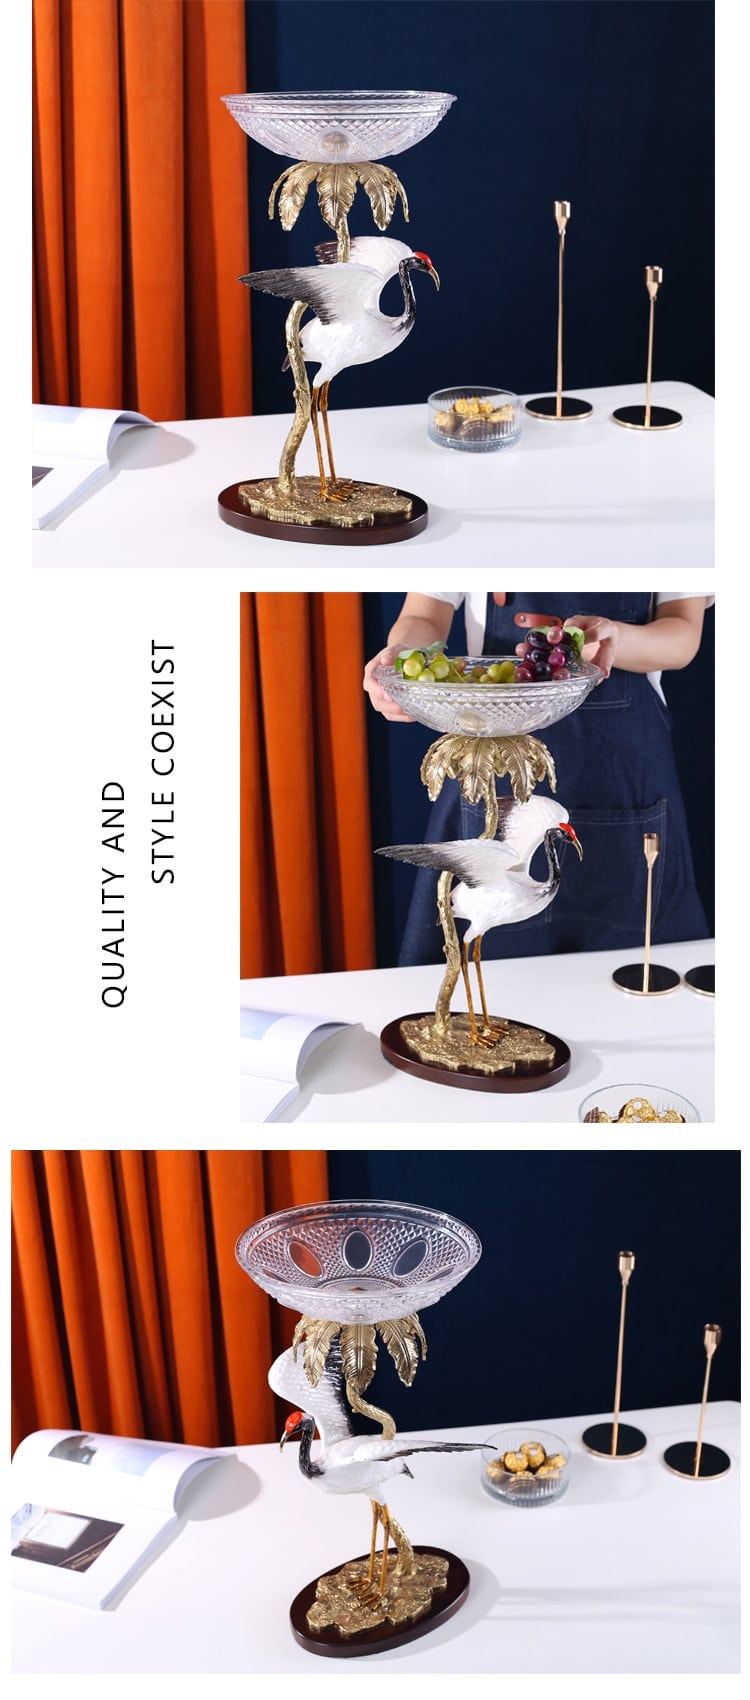 Large 50Cm Luxury Animal Cranes Statue Coconut Gold Tree Figurines Home Crystal Glass Fruit Plate Table Decor Bowl Candy Dish